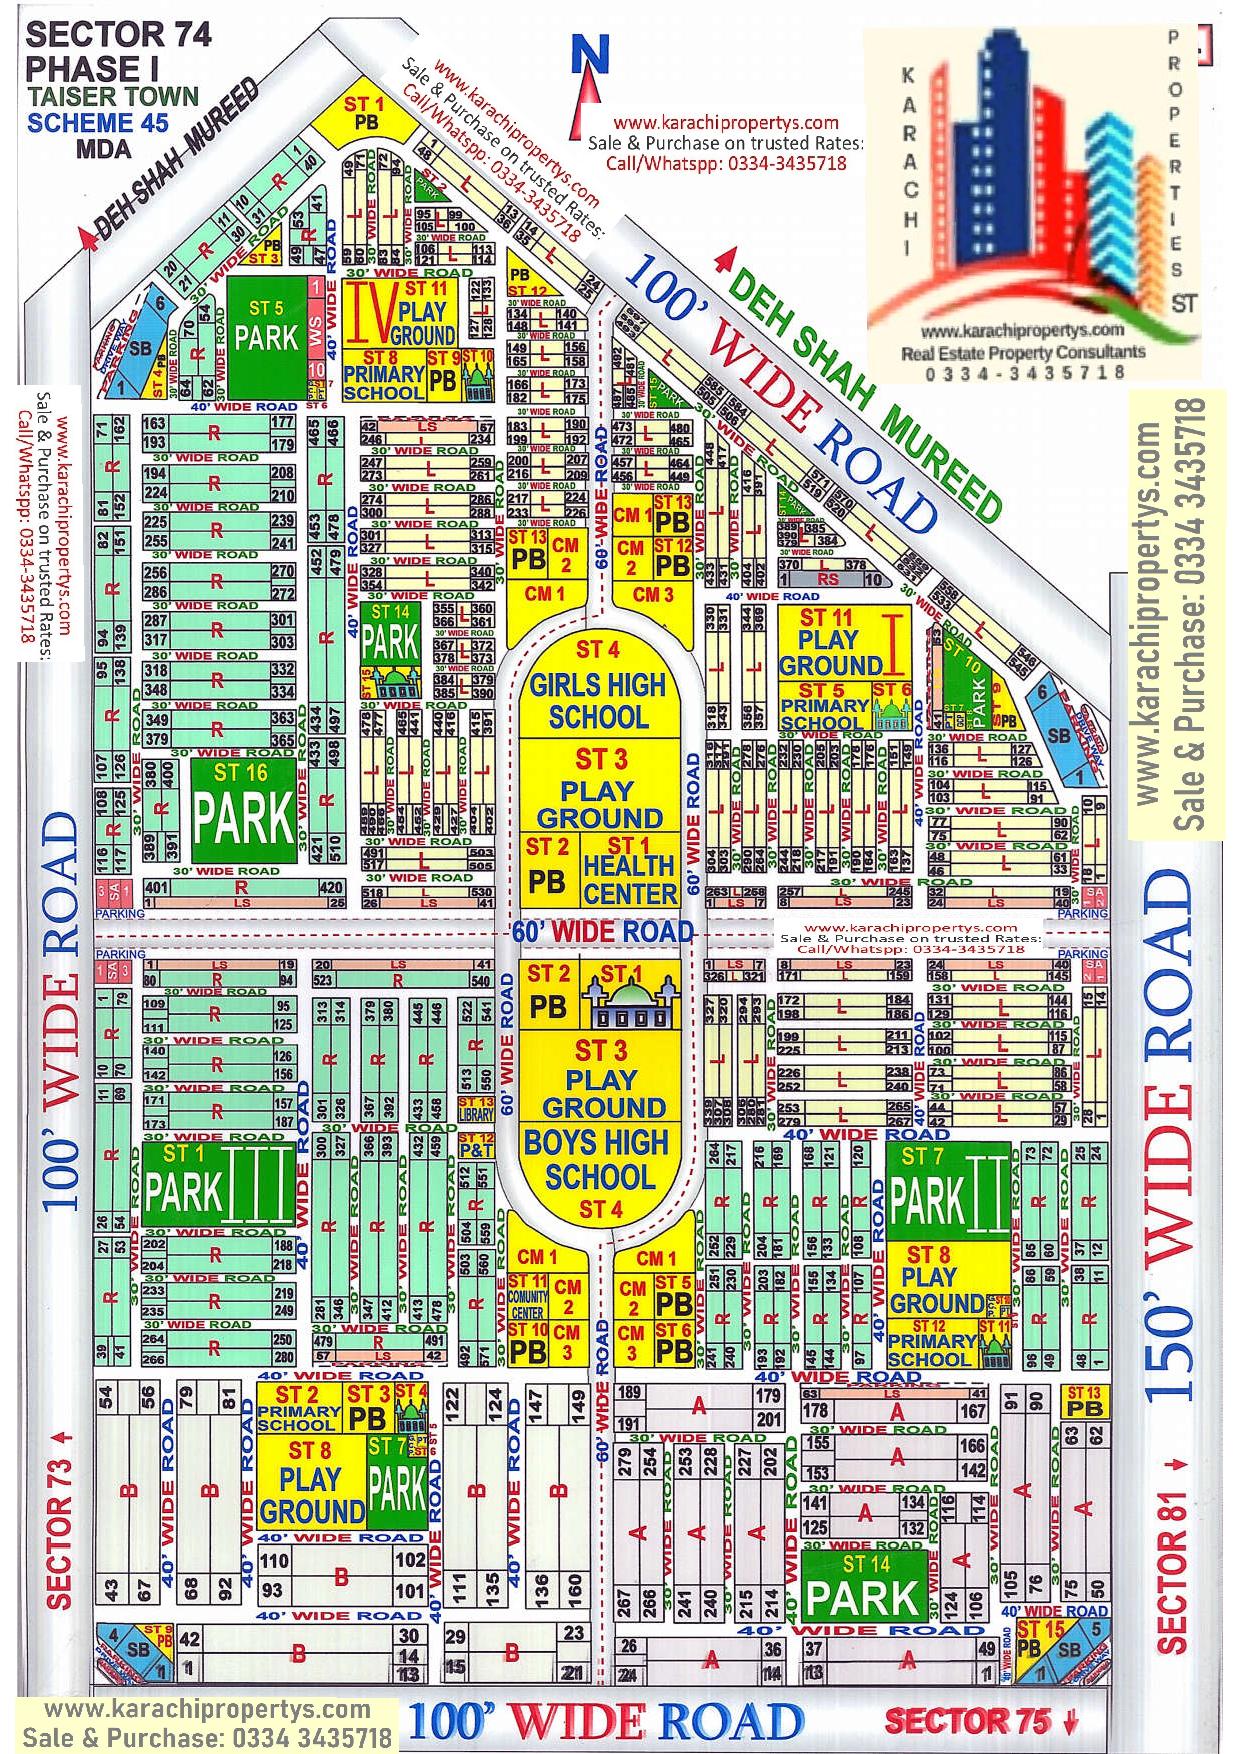 Taiser-Town-latest-map-Sector-74-Phase-1